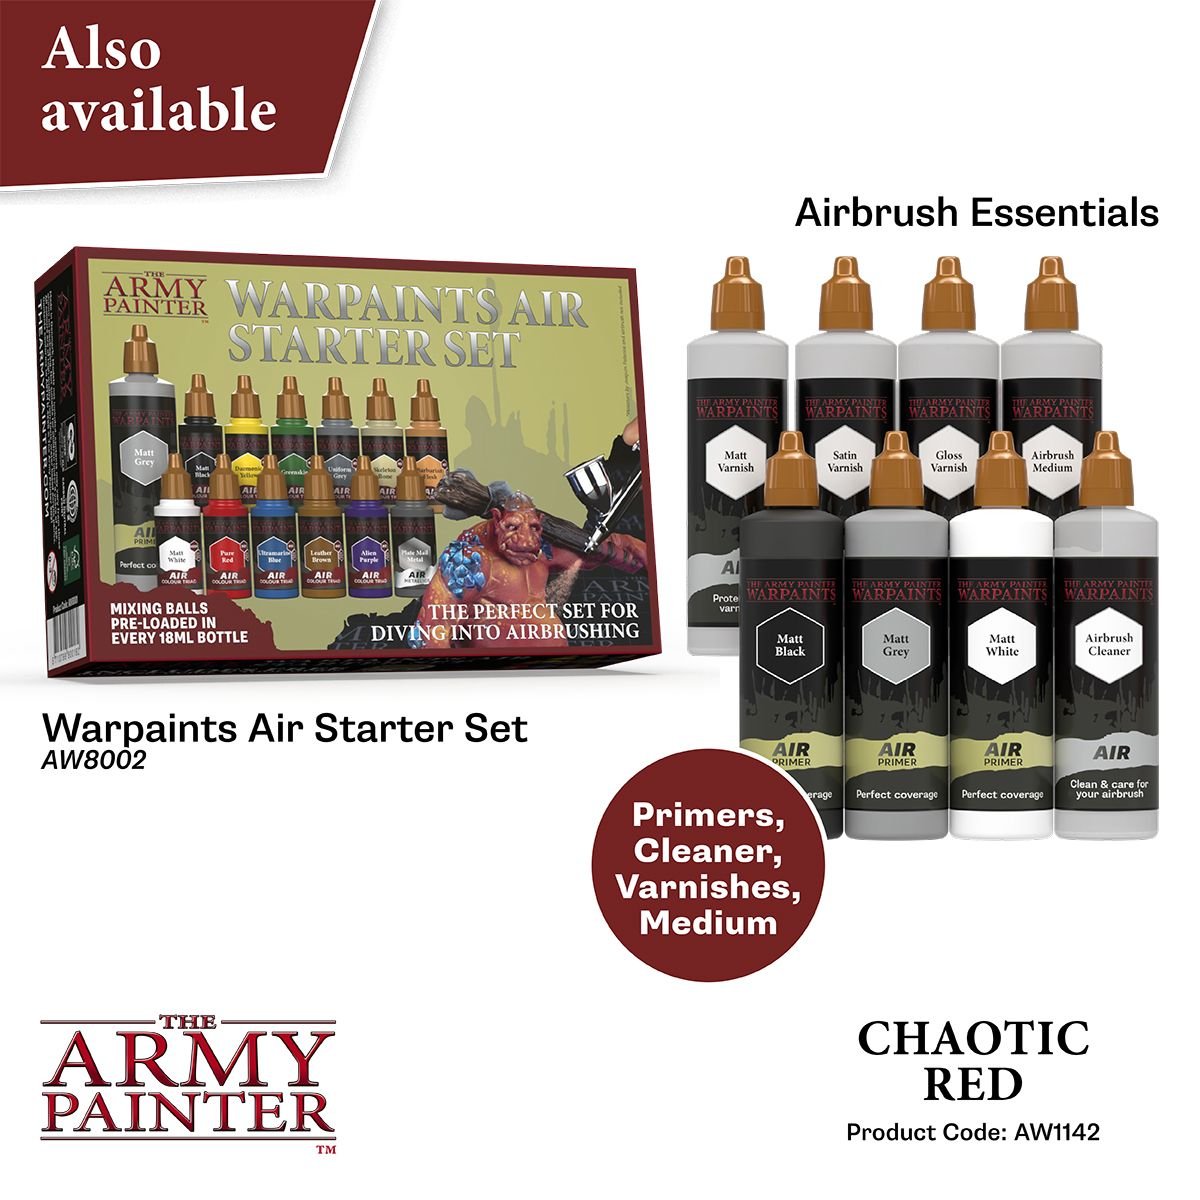 The Army Painter - Warpaints Air: Chaotic Red (18ml/0.6oz)